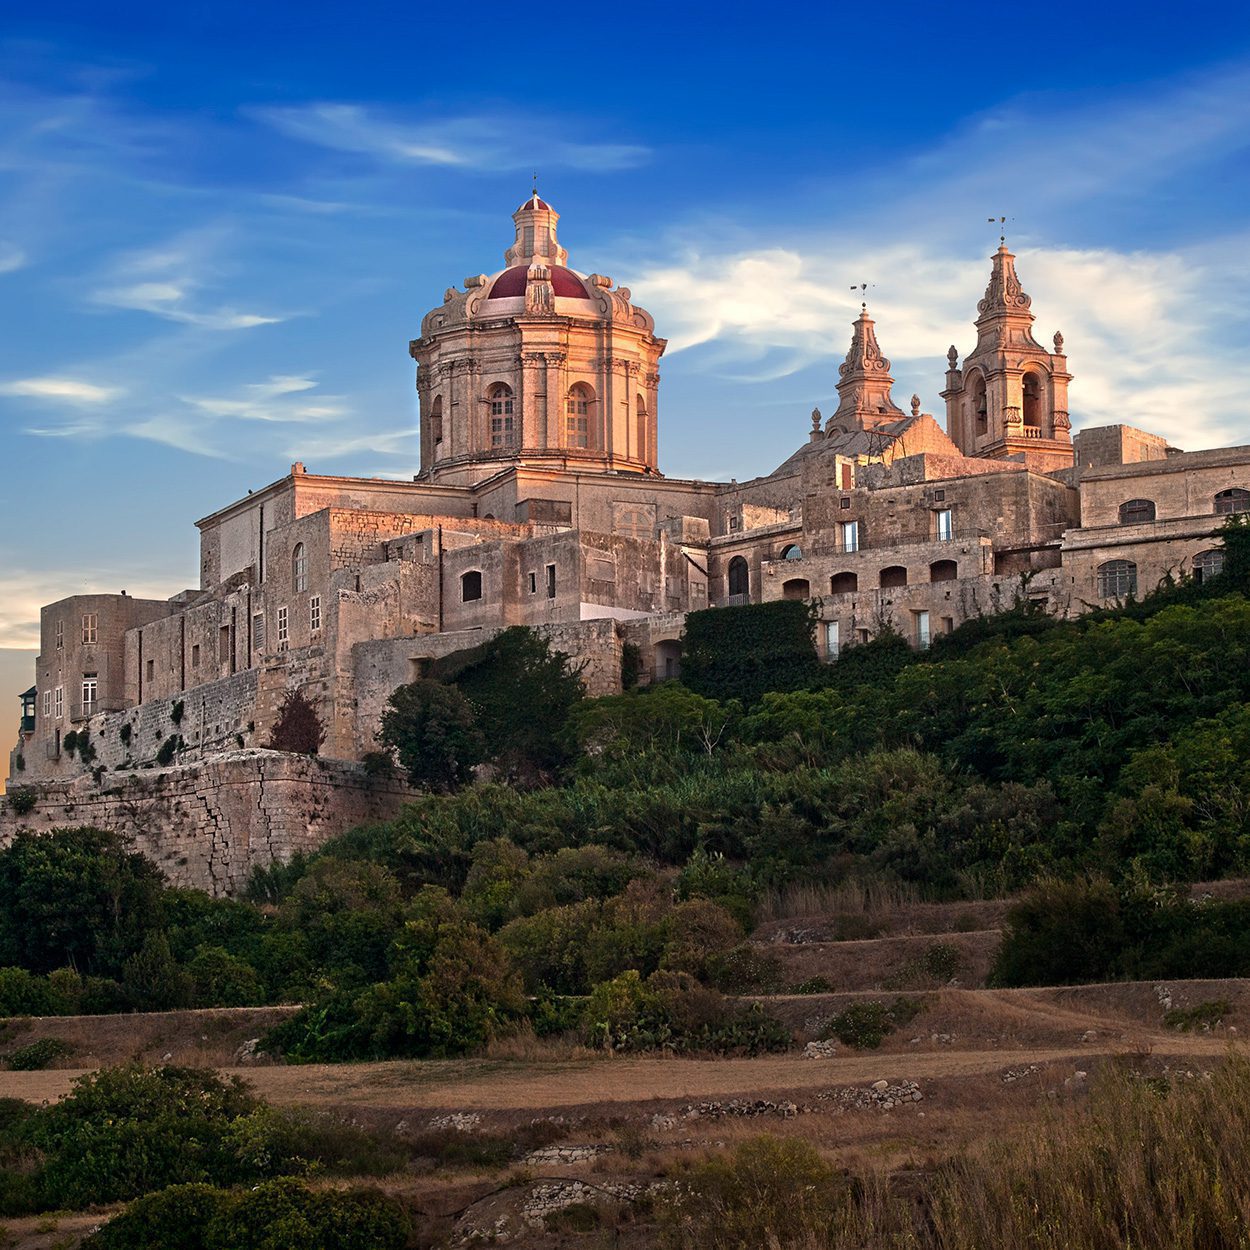 The Mdina Skyline including St Paul's Cathedral and The Xara Palace Relais & Chateaux